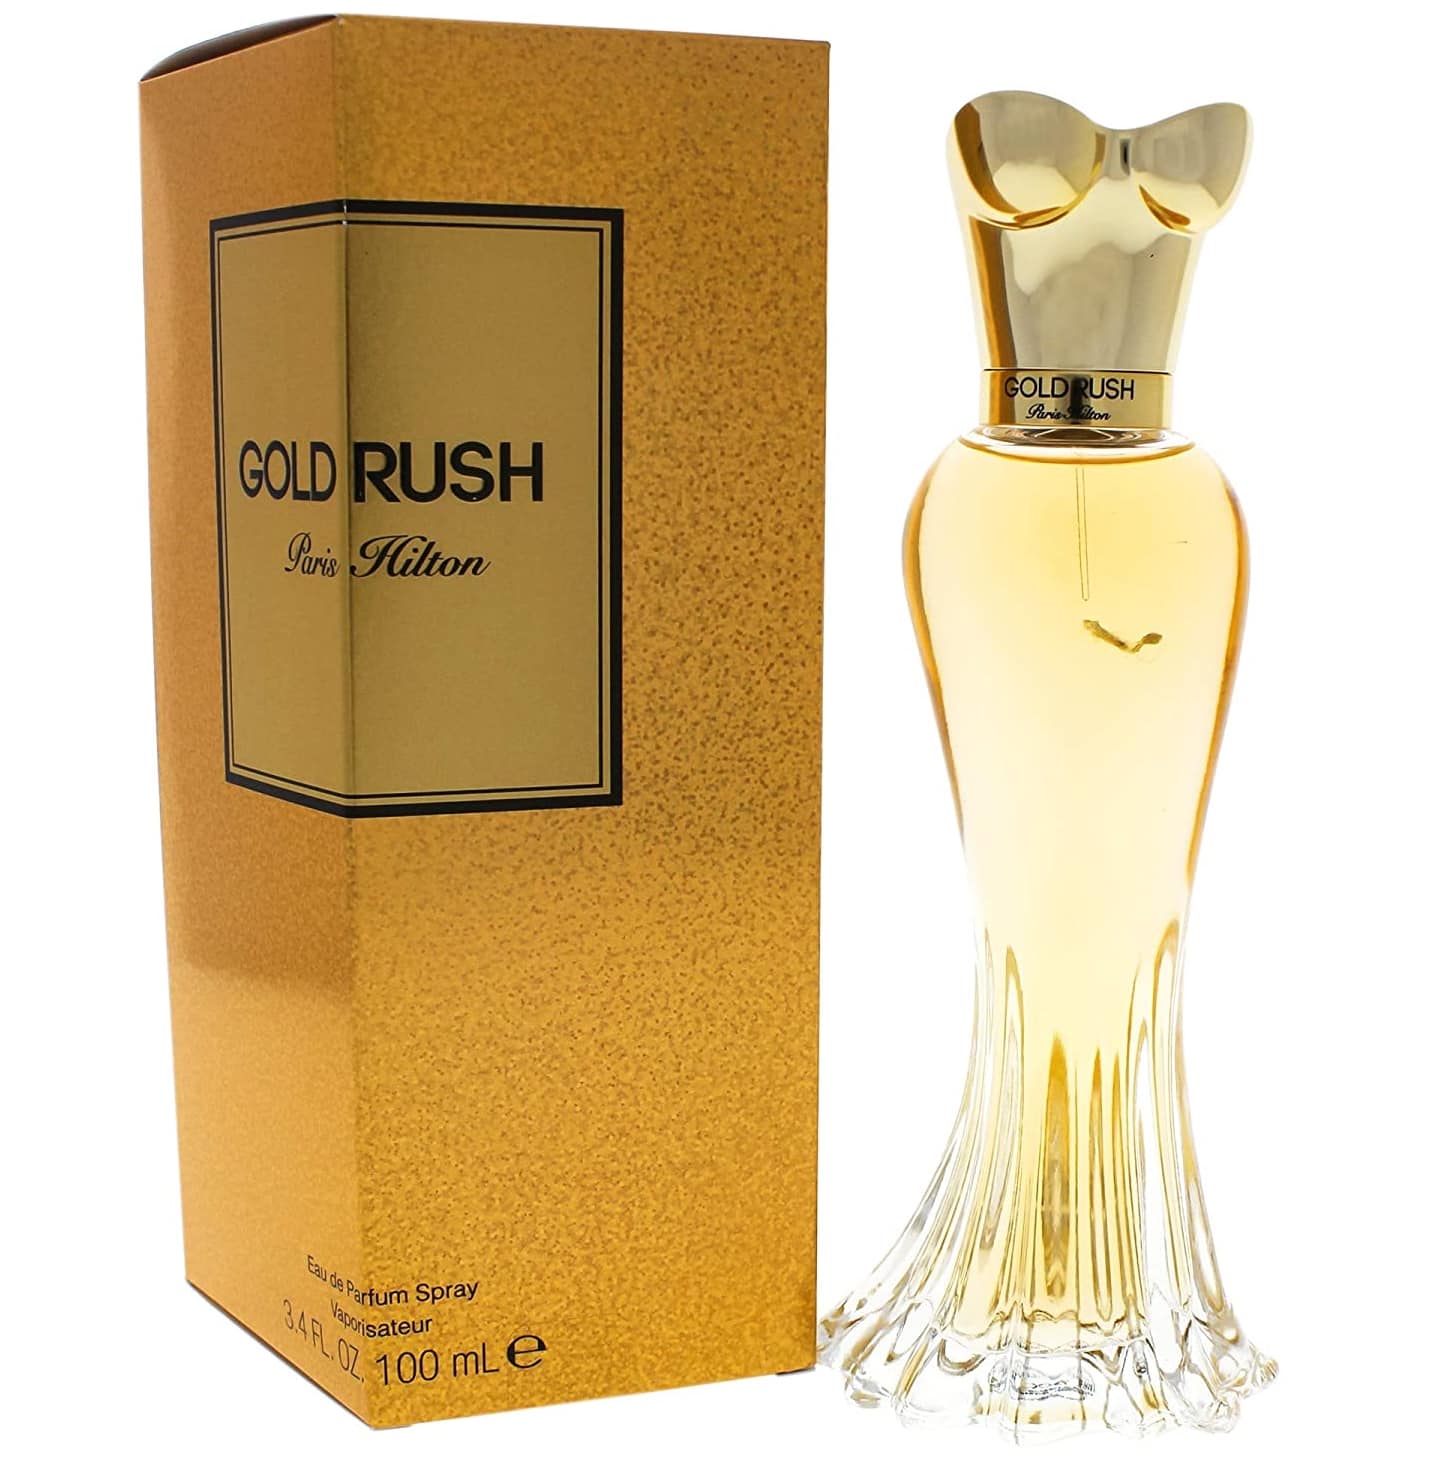 If you like a perfume that smells like candy, Paris Hilton's Gold Rush is perfect